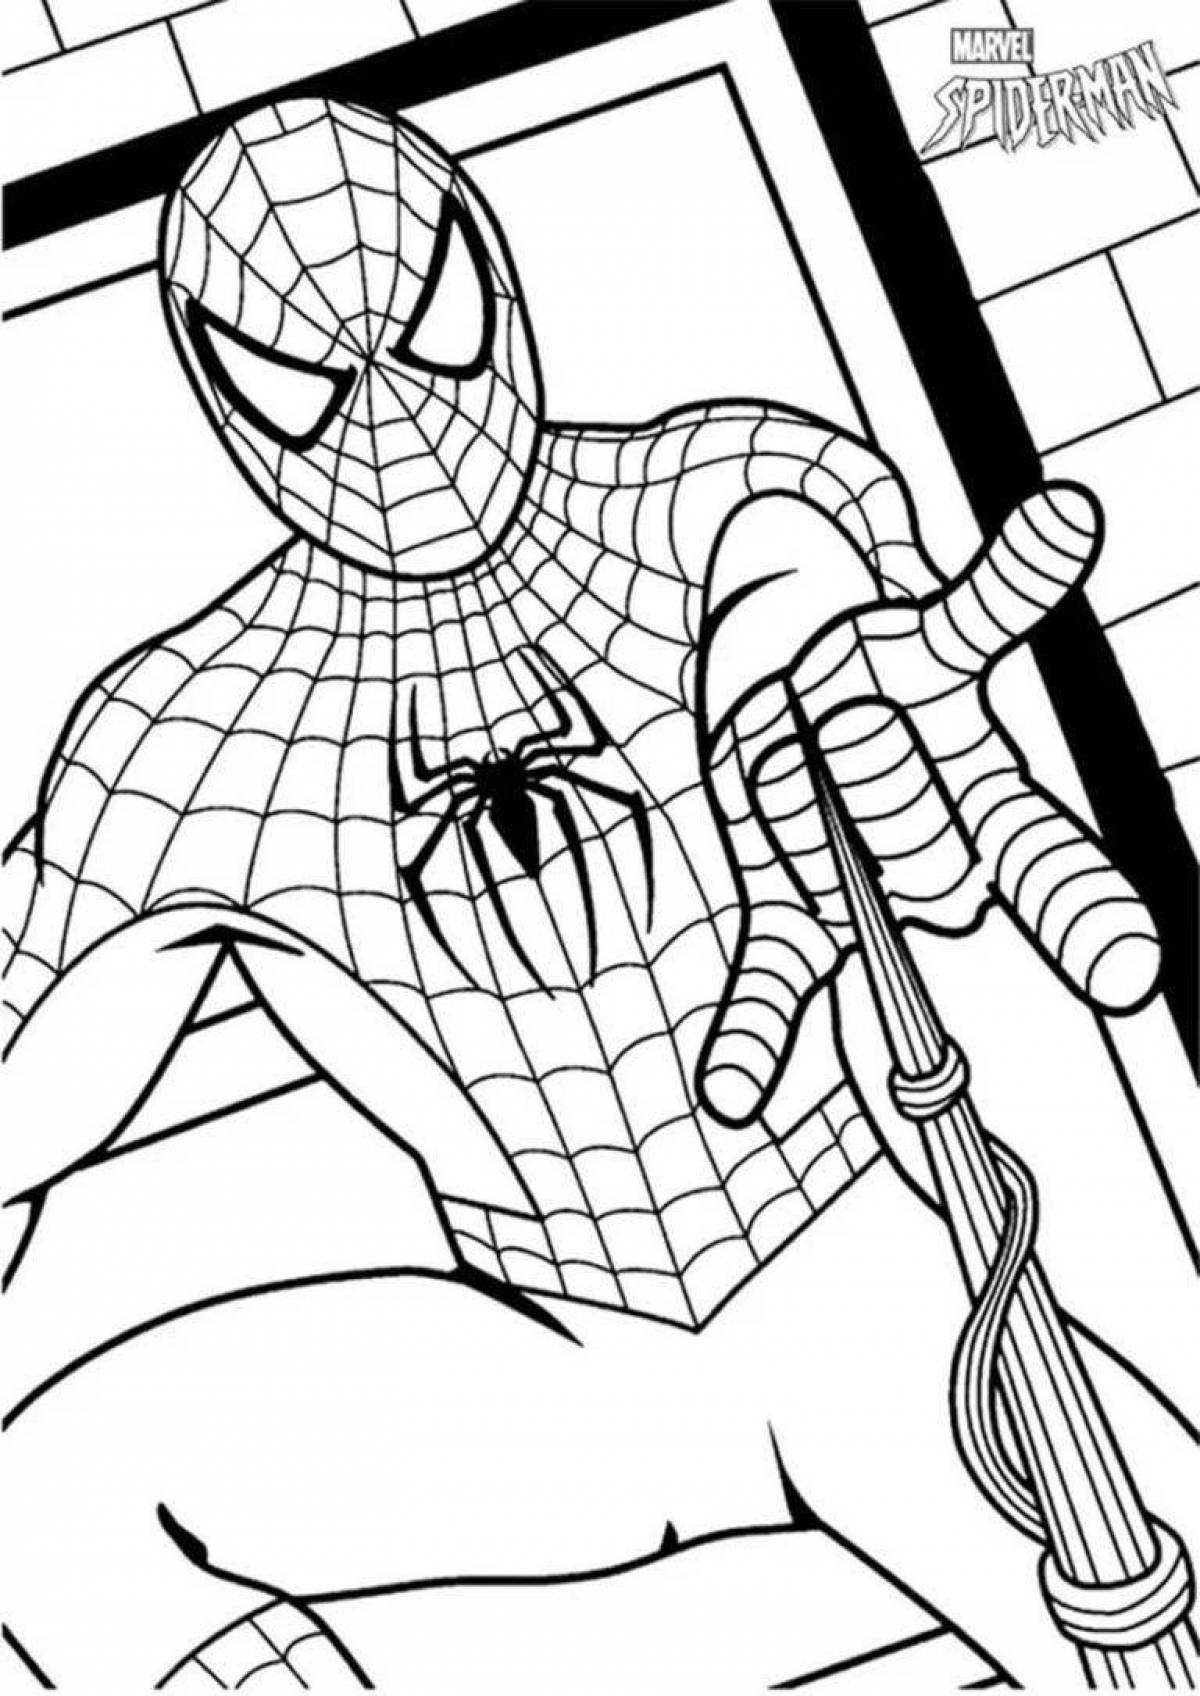 Coloring page playful baby spider